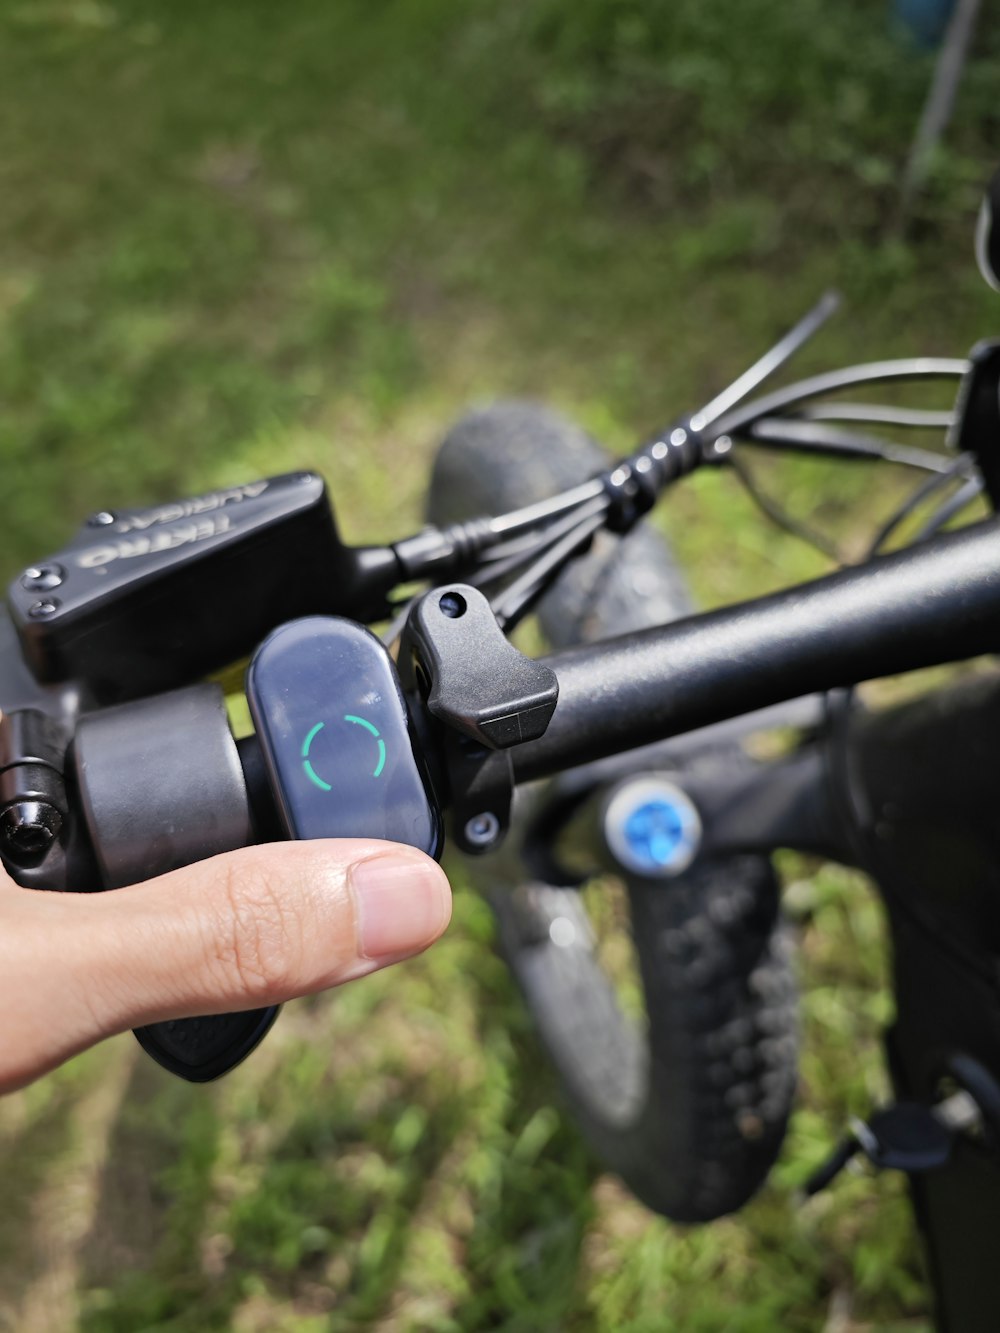 a person is holding a bike handlebar with a camera attached to it